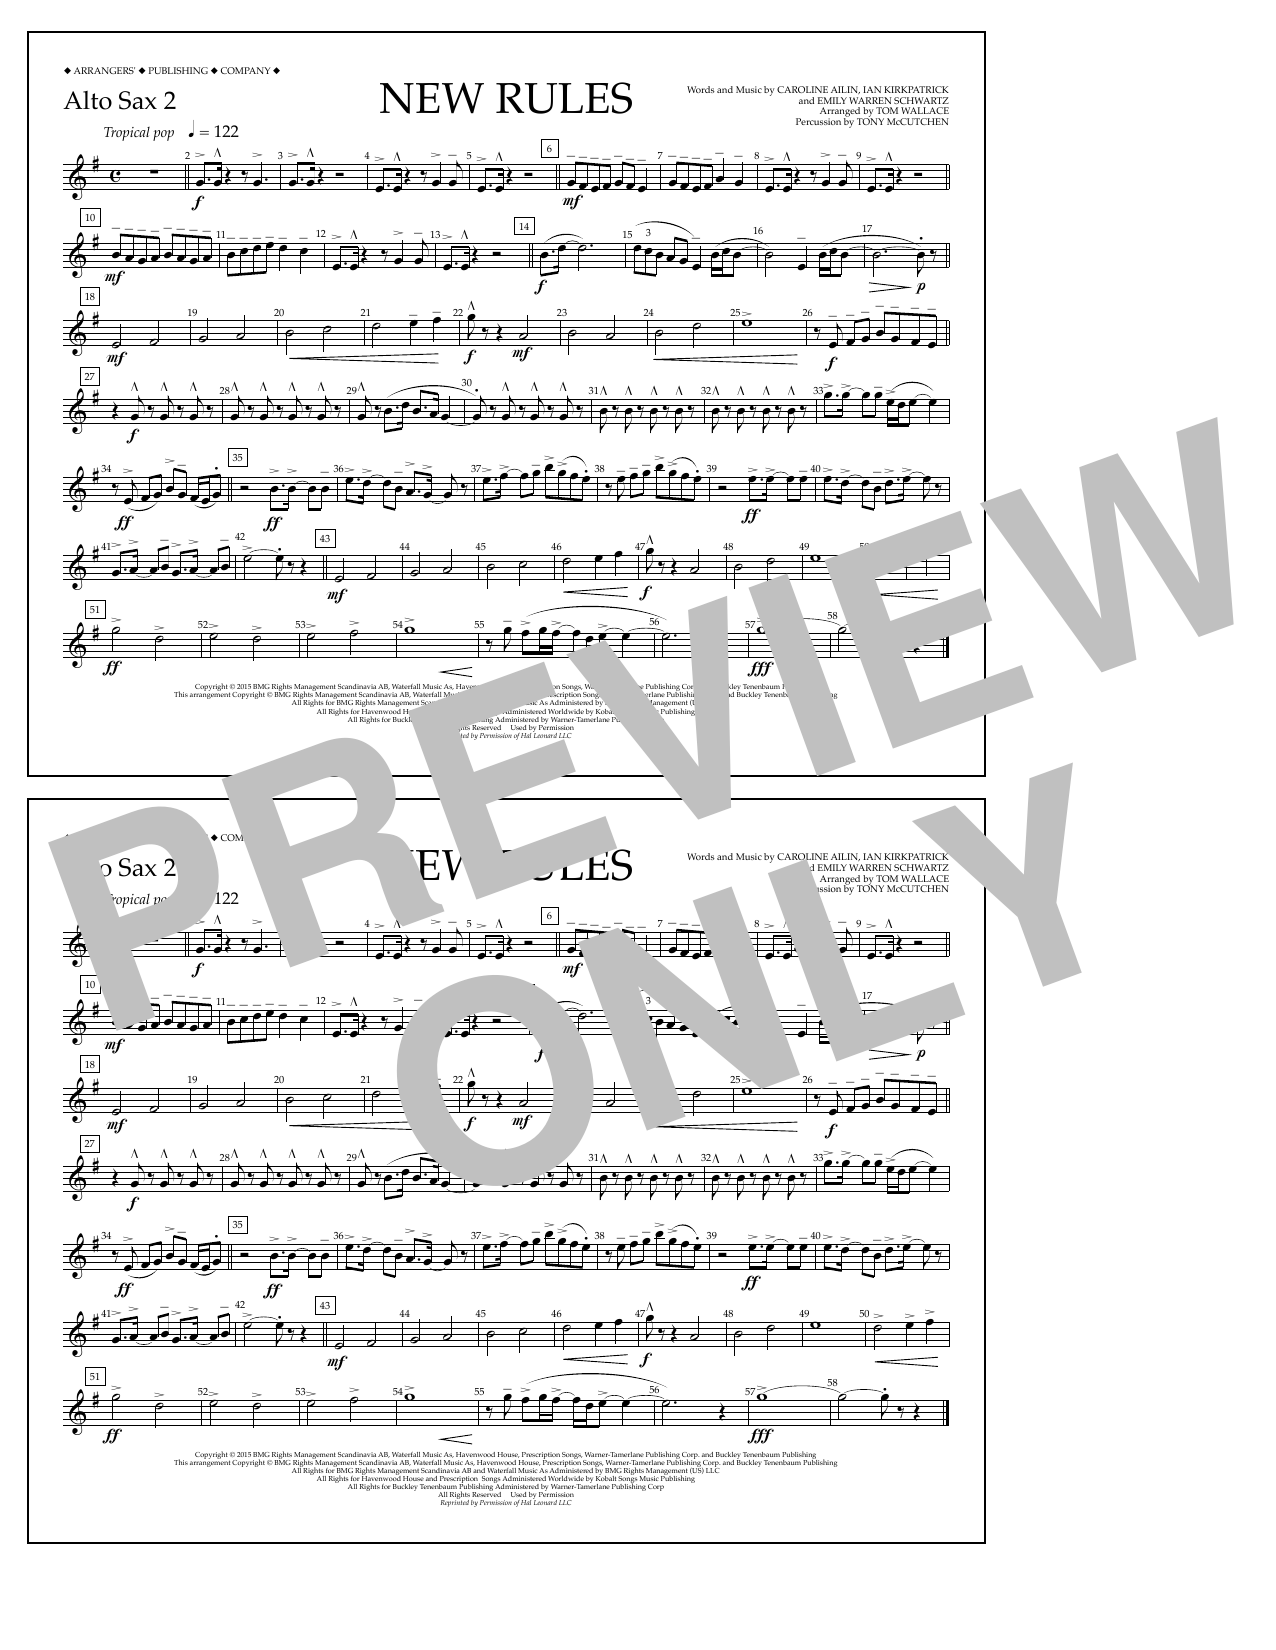 Download Tom Wallace New Rules - Alto Sax 2 Sheet Music